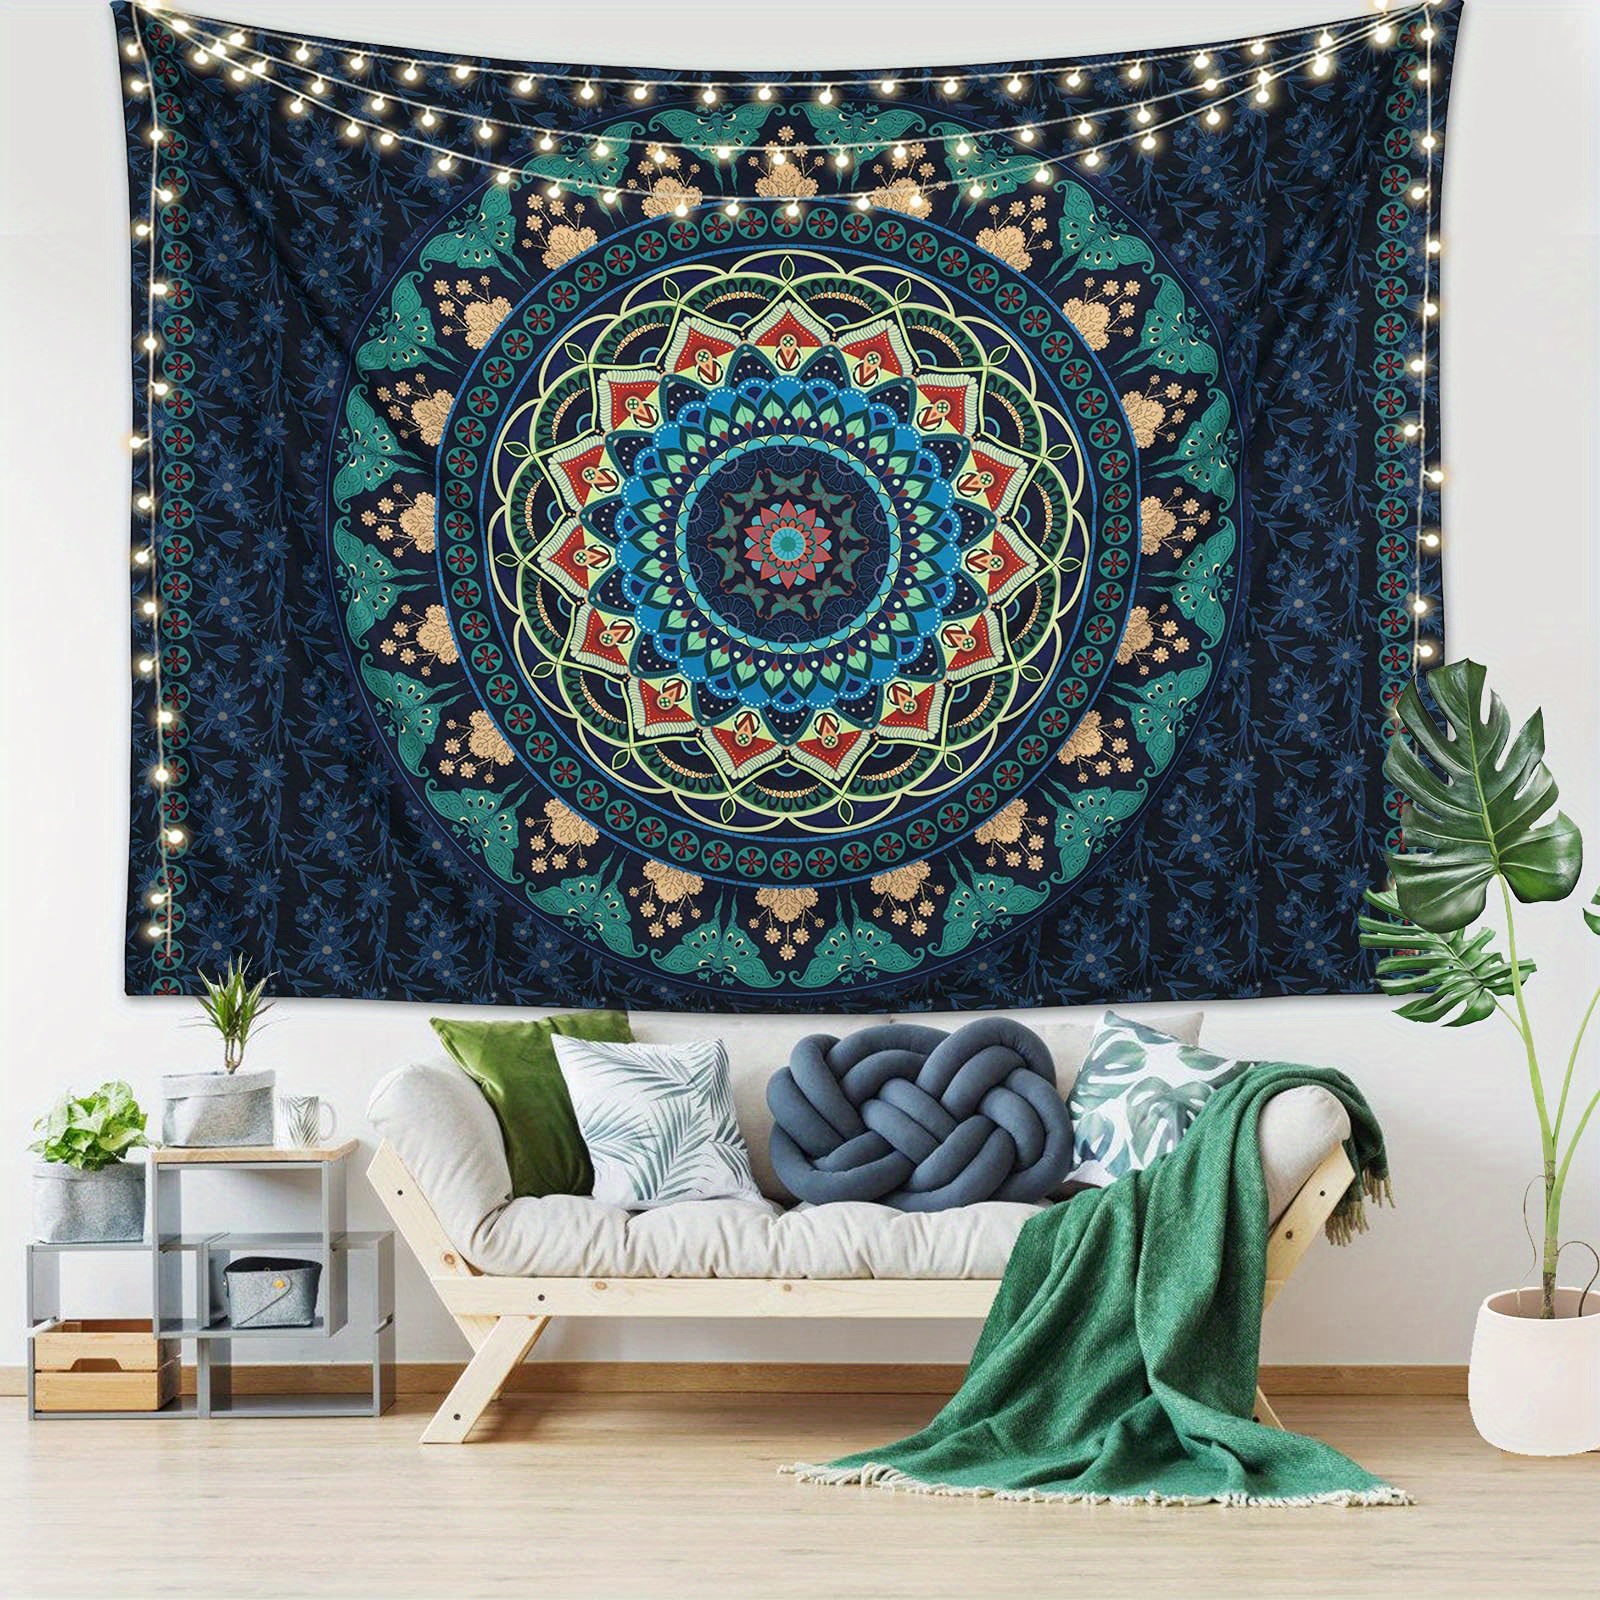 

1pc, Boho Mandala Tapestry Aesthetic Wall Hanging Psychedelic Hippie Butterfly Tapestries Vintage Wall Art Home Decor For Bedroom Living Room Dorm Classroom Office Decor Wall Art Decor Gift (green)